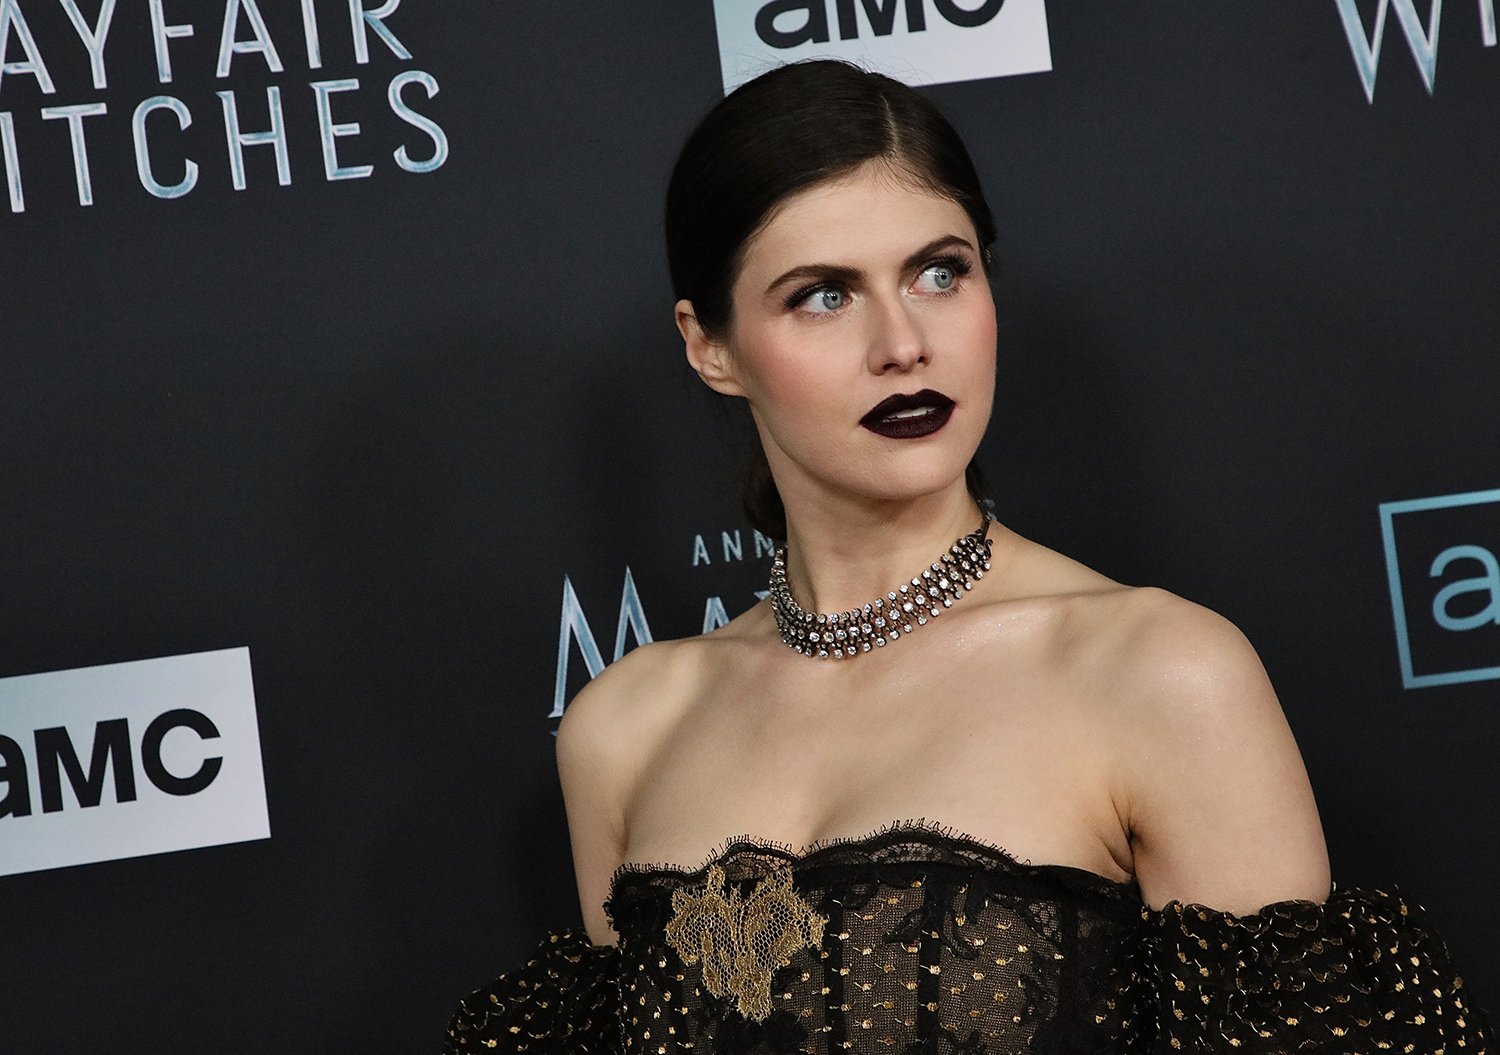 Alexandra Daddario poses at the premiere of Mayfair Witches in Los Angeles.